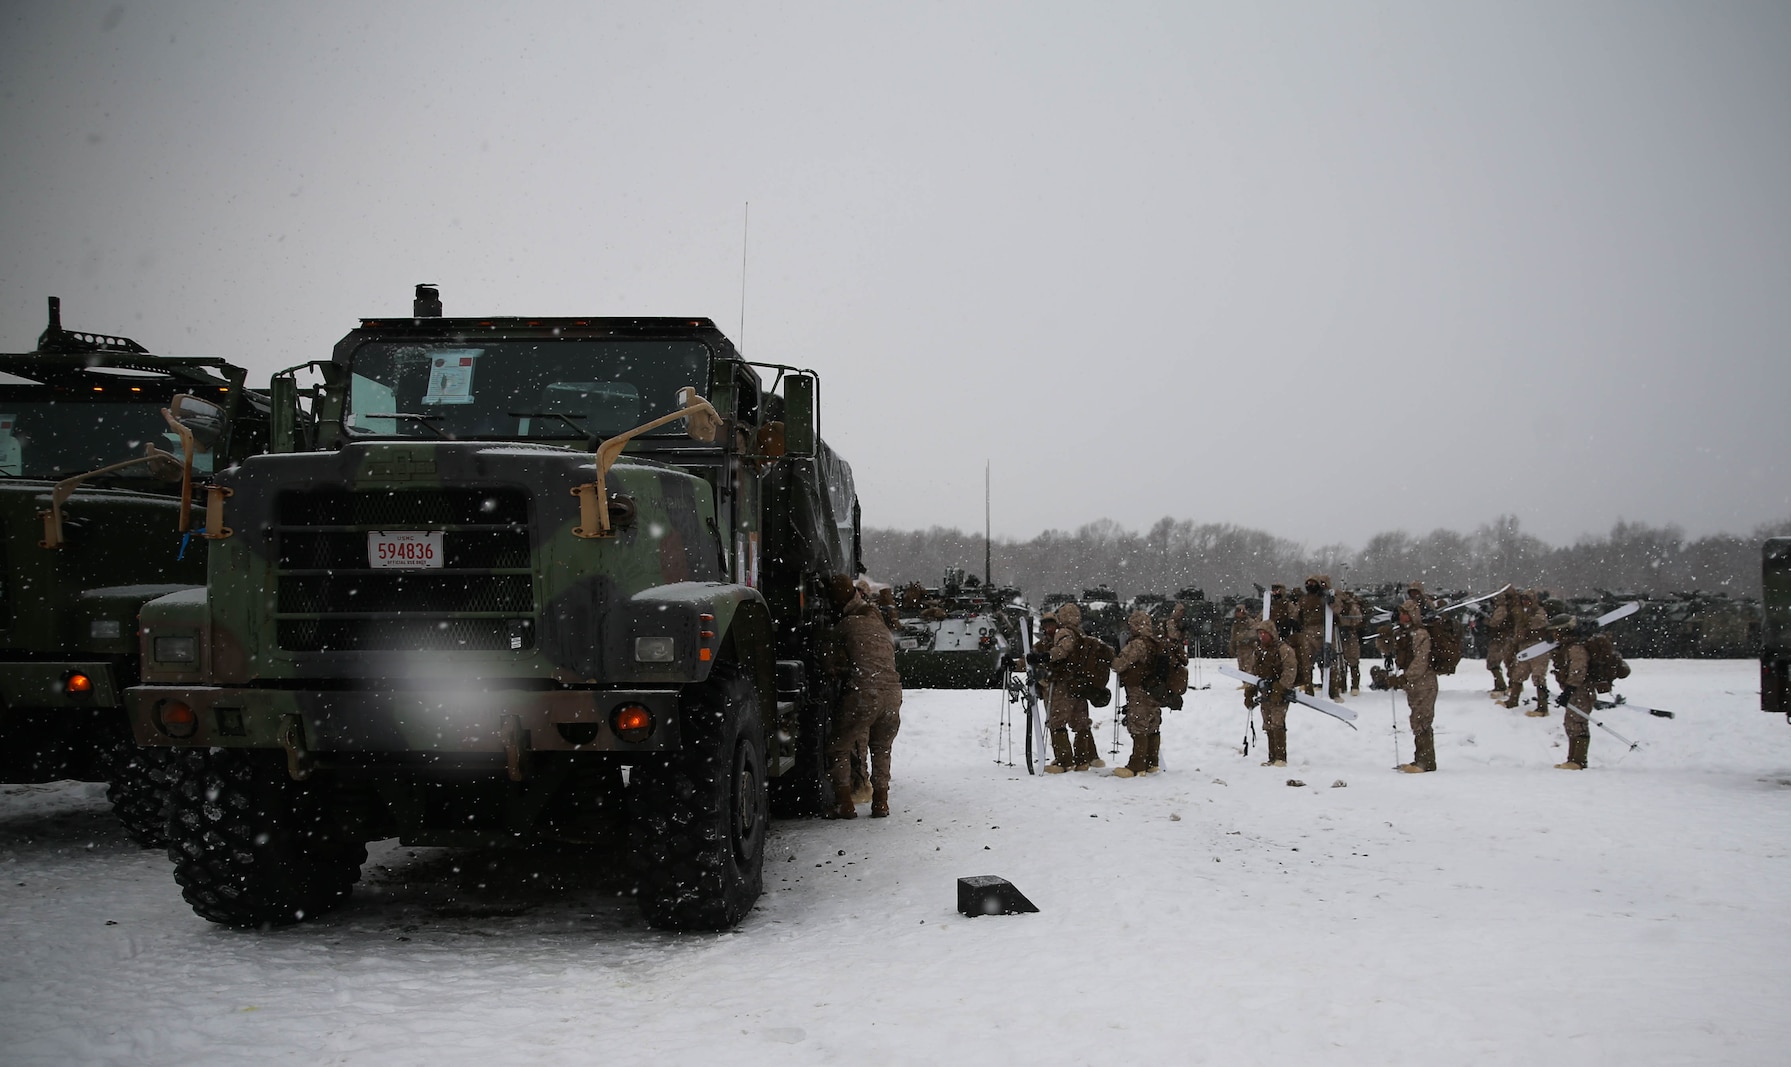 U.S. Marines from Golf Company, 2nd Battalion, 3rd Marine Regiment, 3rd Marine Division, get into 7-ton trucks to move to an area where they can conduct bilateral ski patrol training with Soldiers from 5th Brigade, Japan Ground Self-Defense Force (JGSDF), during exercise Northern Viper on Hokudaien Training Area, Hokkaido, Japan, Jan. 24, 2020. Northern Viper is a regularly scheduled training exercise that is designed to enhance the collective defense capabilities of the U.S. and Japan Alliance by exposing members of both forces to intense training in an austere environment, allowing them to perfect their skills in any clime and place. (U.S. Marine Corps Photo By Cpl. Cameron E. Parks)